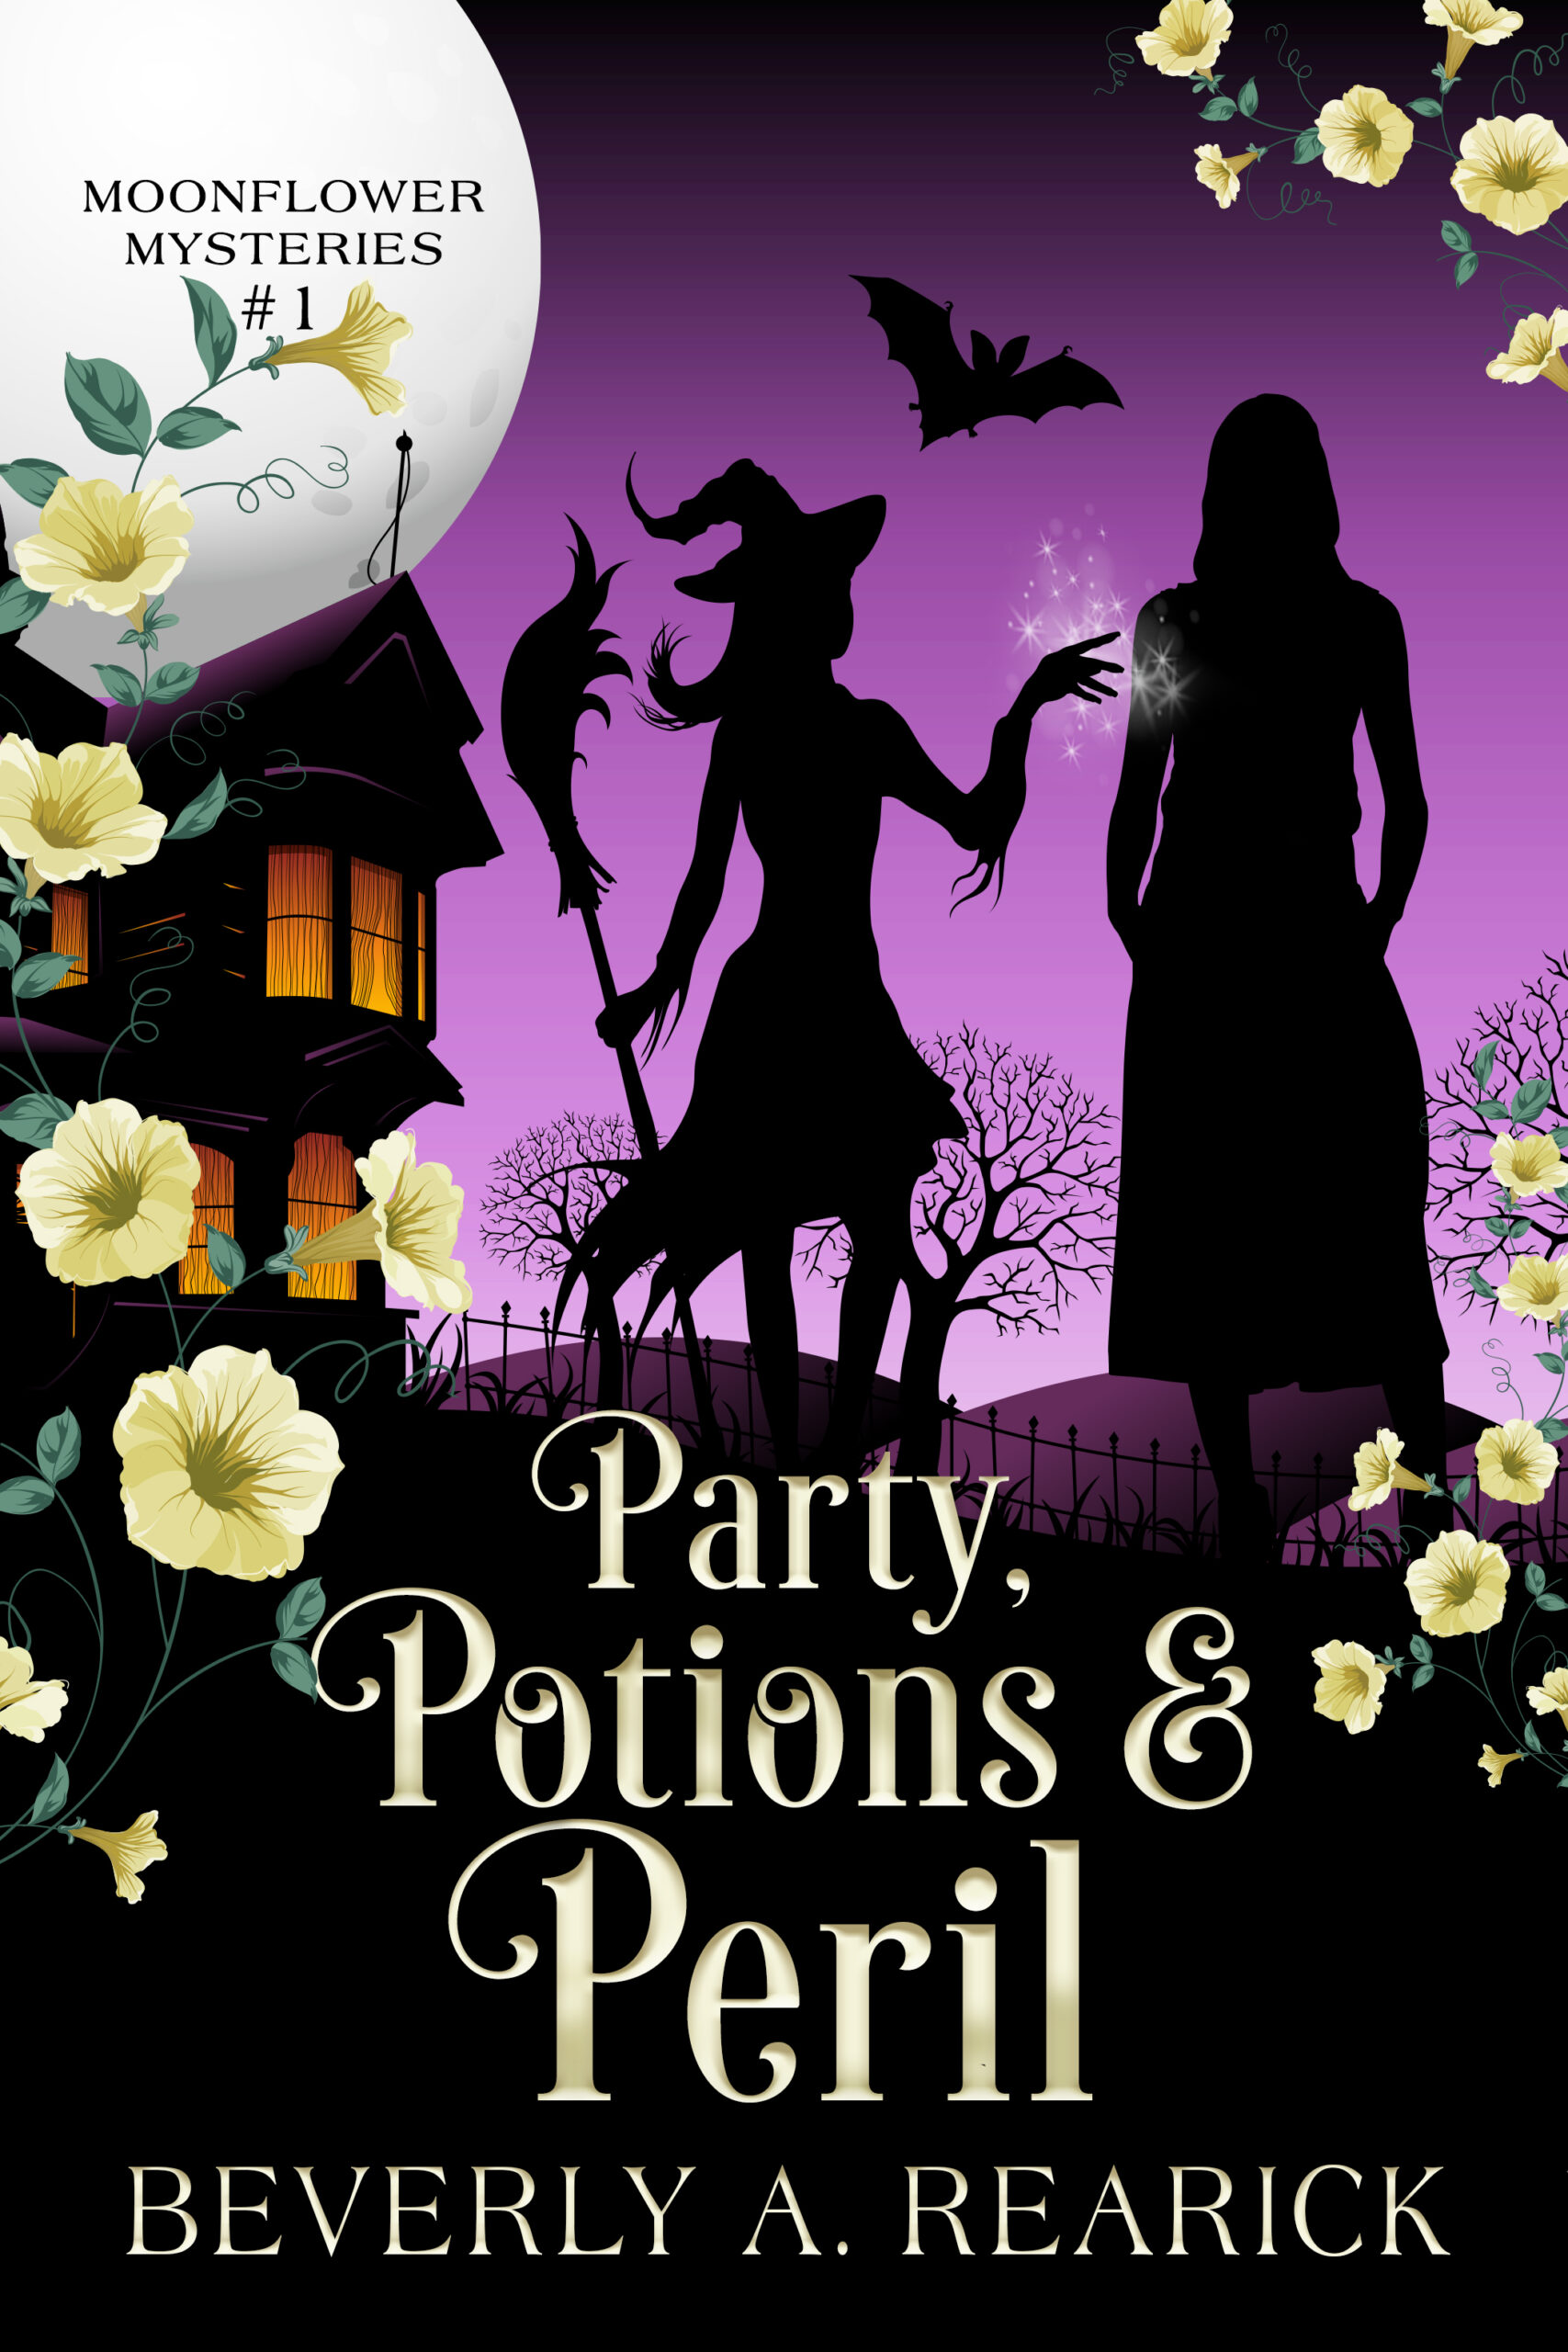 FREE: Party, Potions & Peril by Beverly A. Rearick